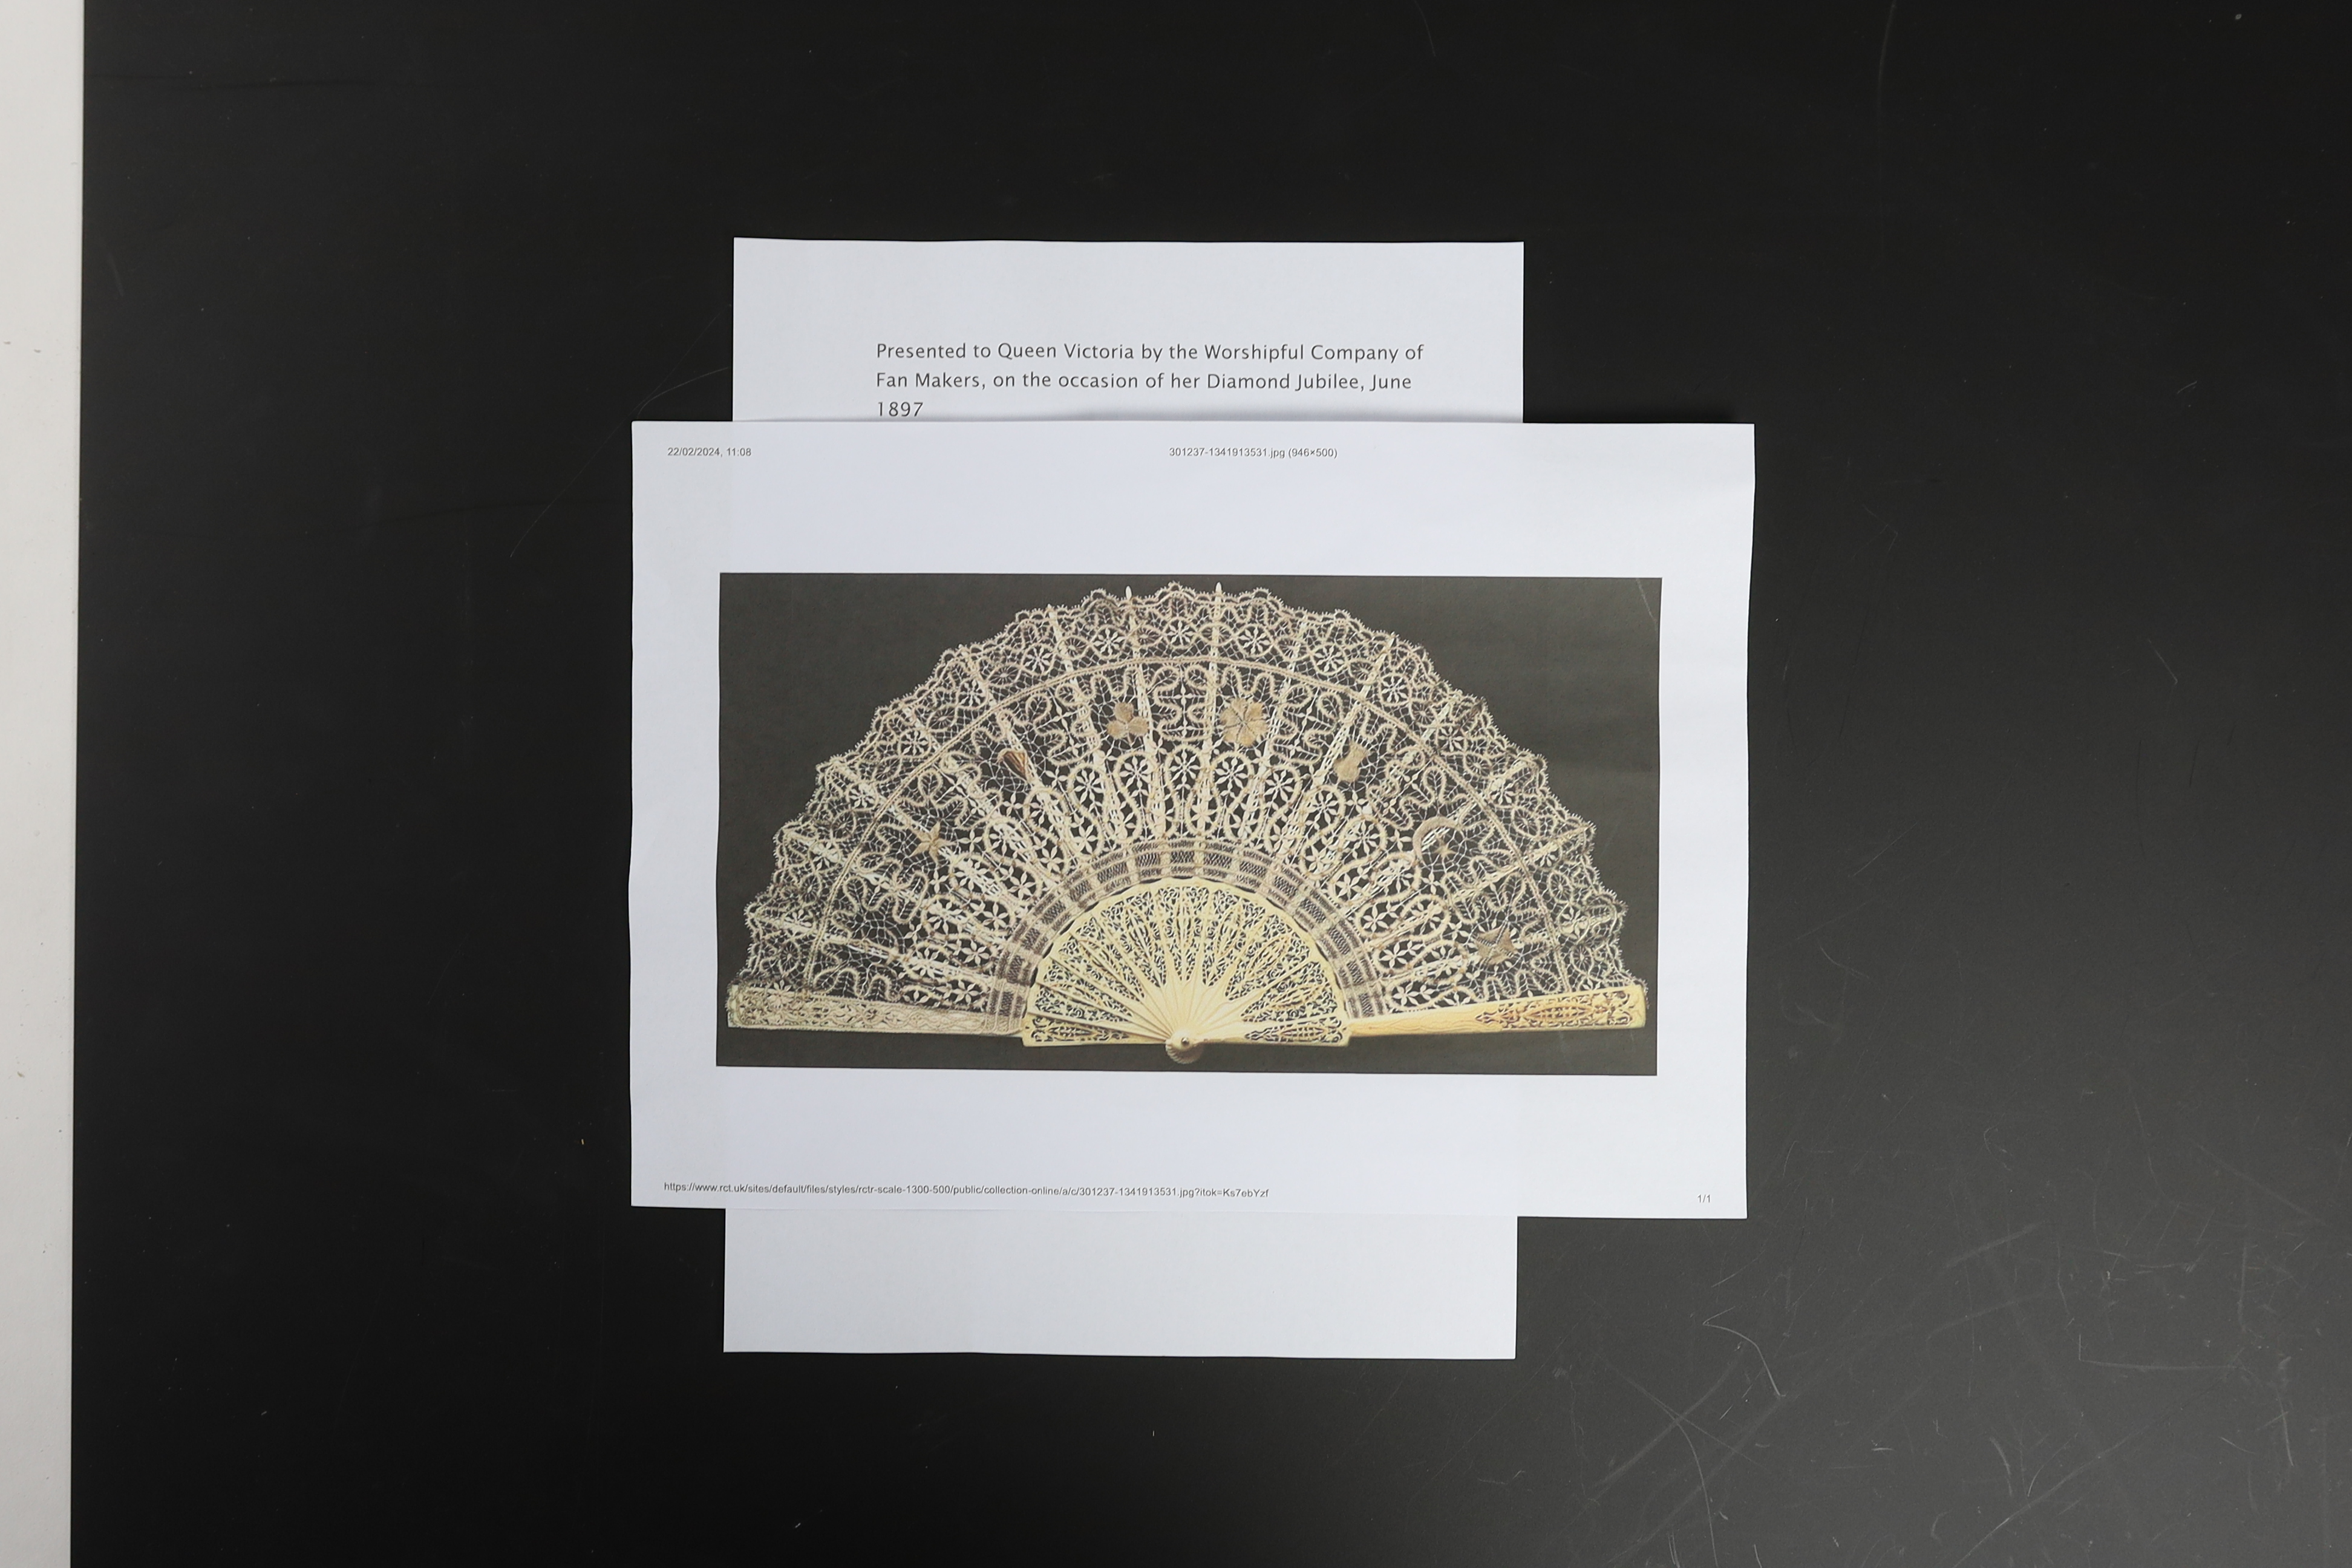 An unusual commemorative Carrickmacross lace fan, possibly one made and entered for a group of competitions held by the Worshipful Company of Fan Makers, the winning fan to be presented to Queen Victoria as a gift for he